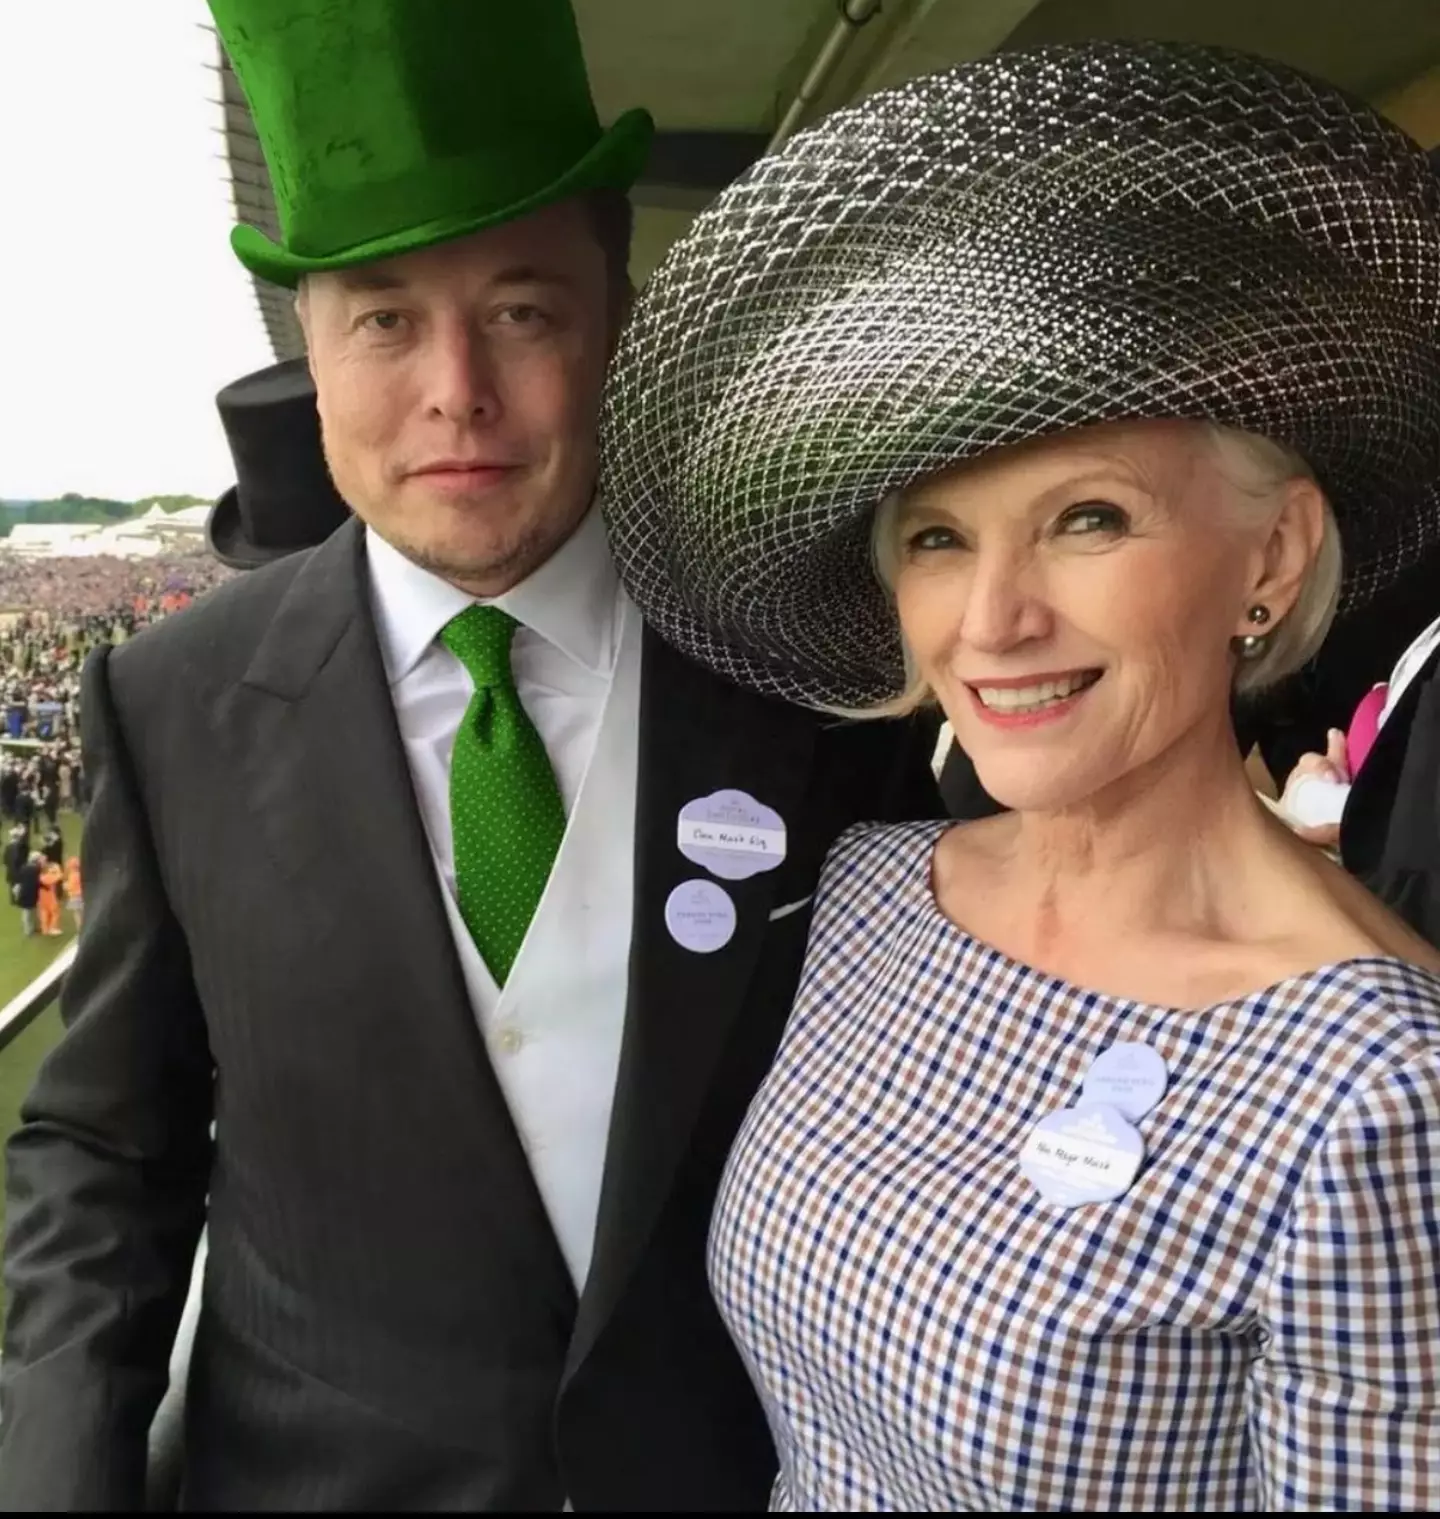 Musk and his mother seen on St Patrick's Day.